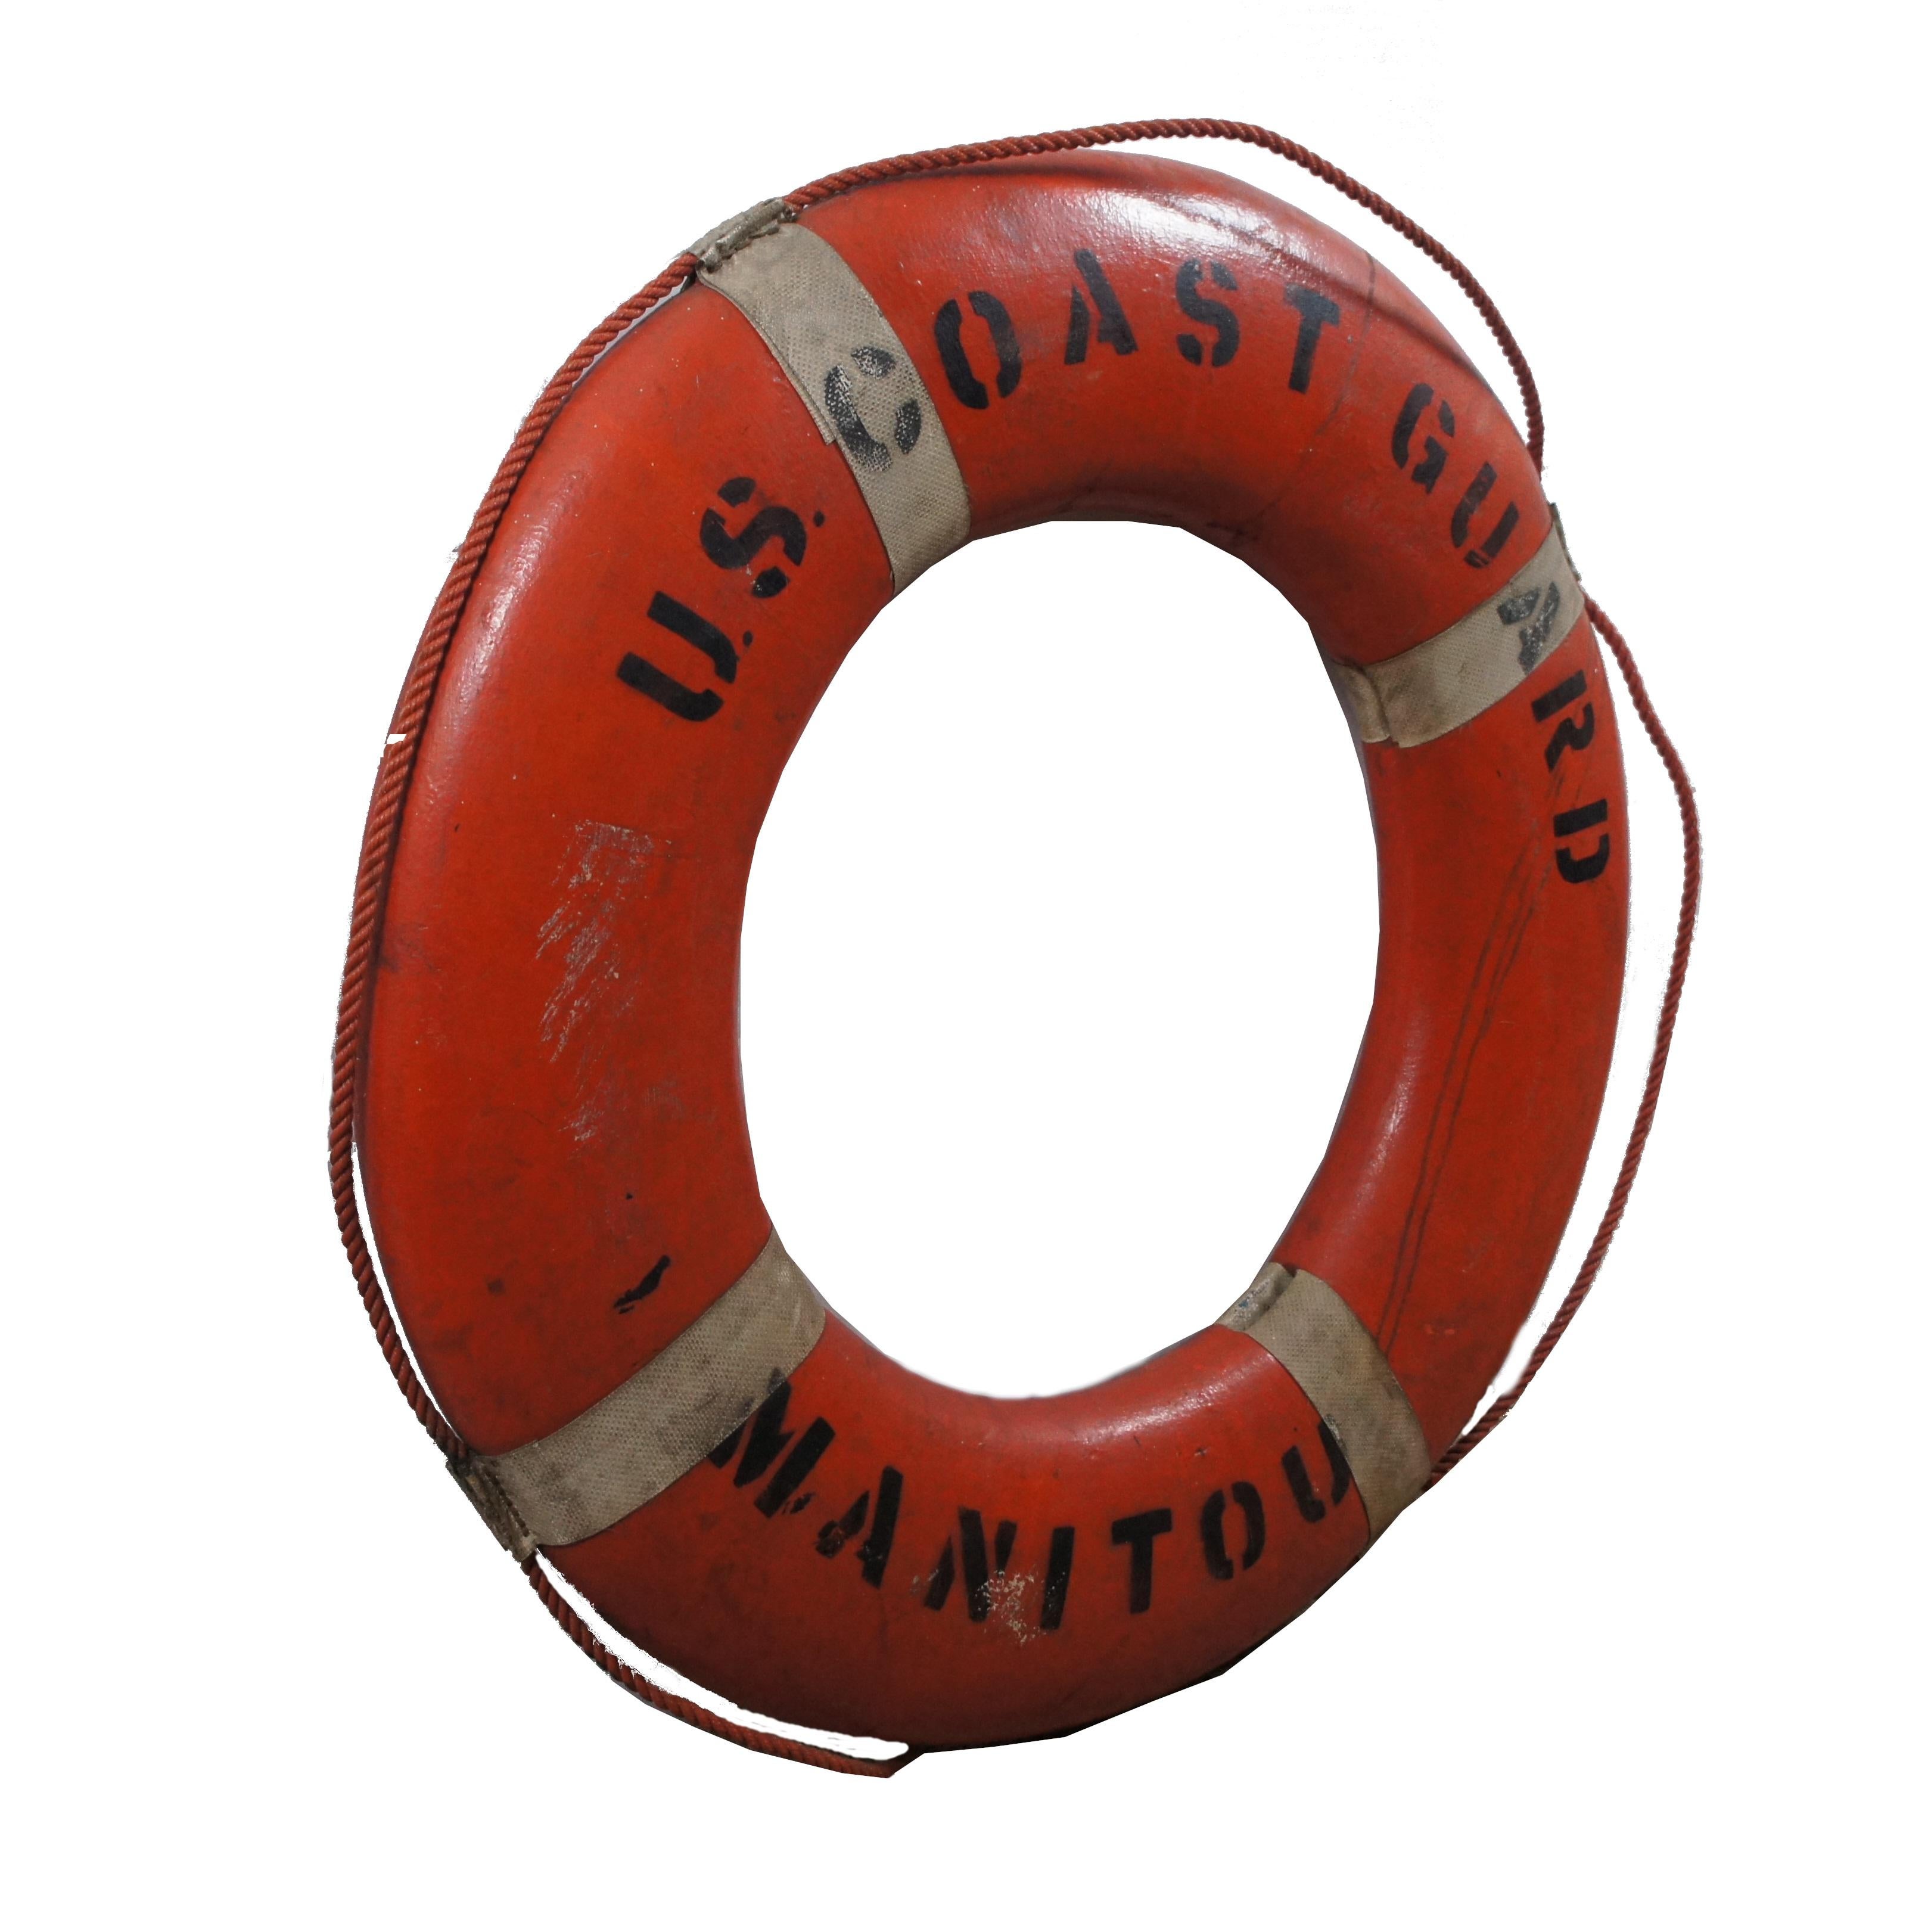 Mid century nautical maritime U.S. Coast Guard Manitou hard foam preserver buoy safety ring featuring an orange painted exterior with white straps and orange rope handles.

